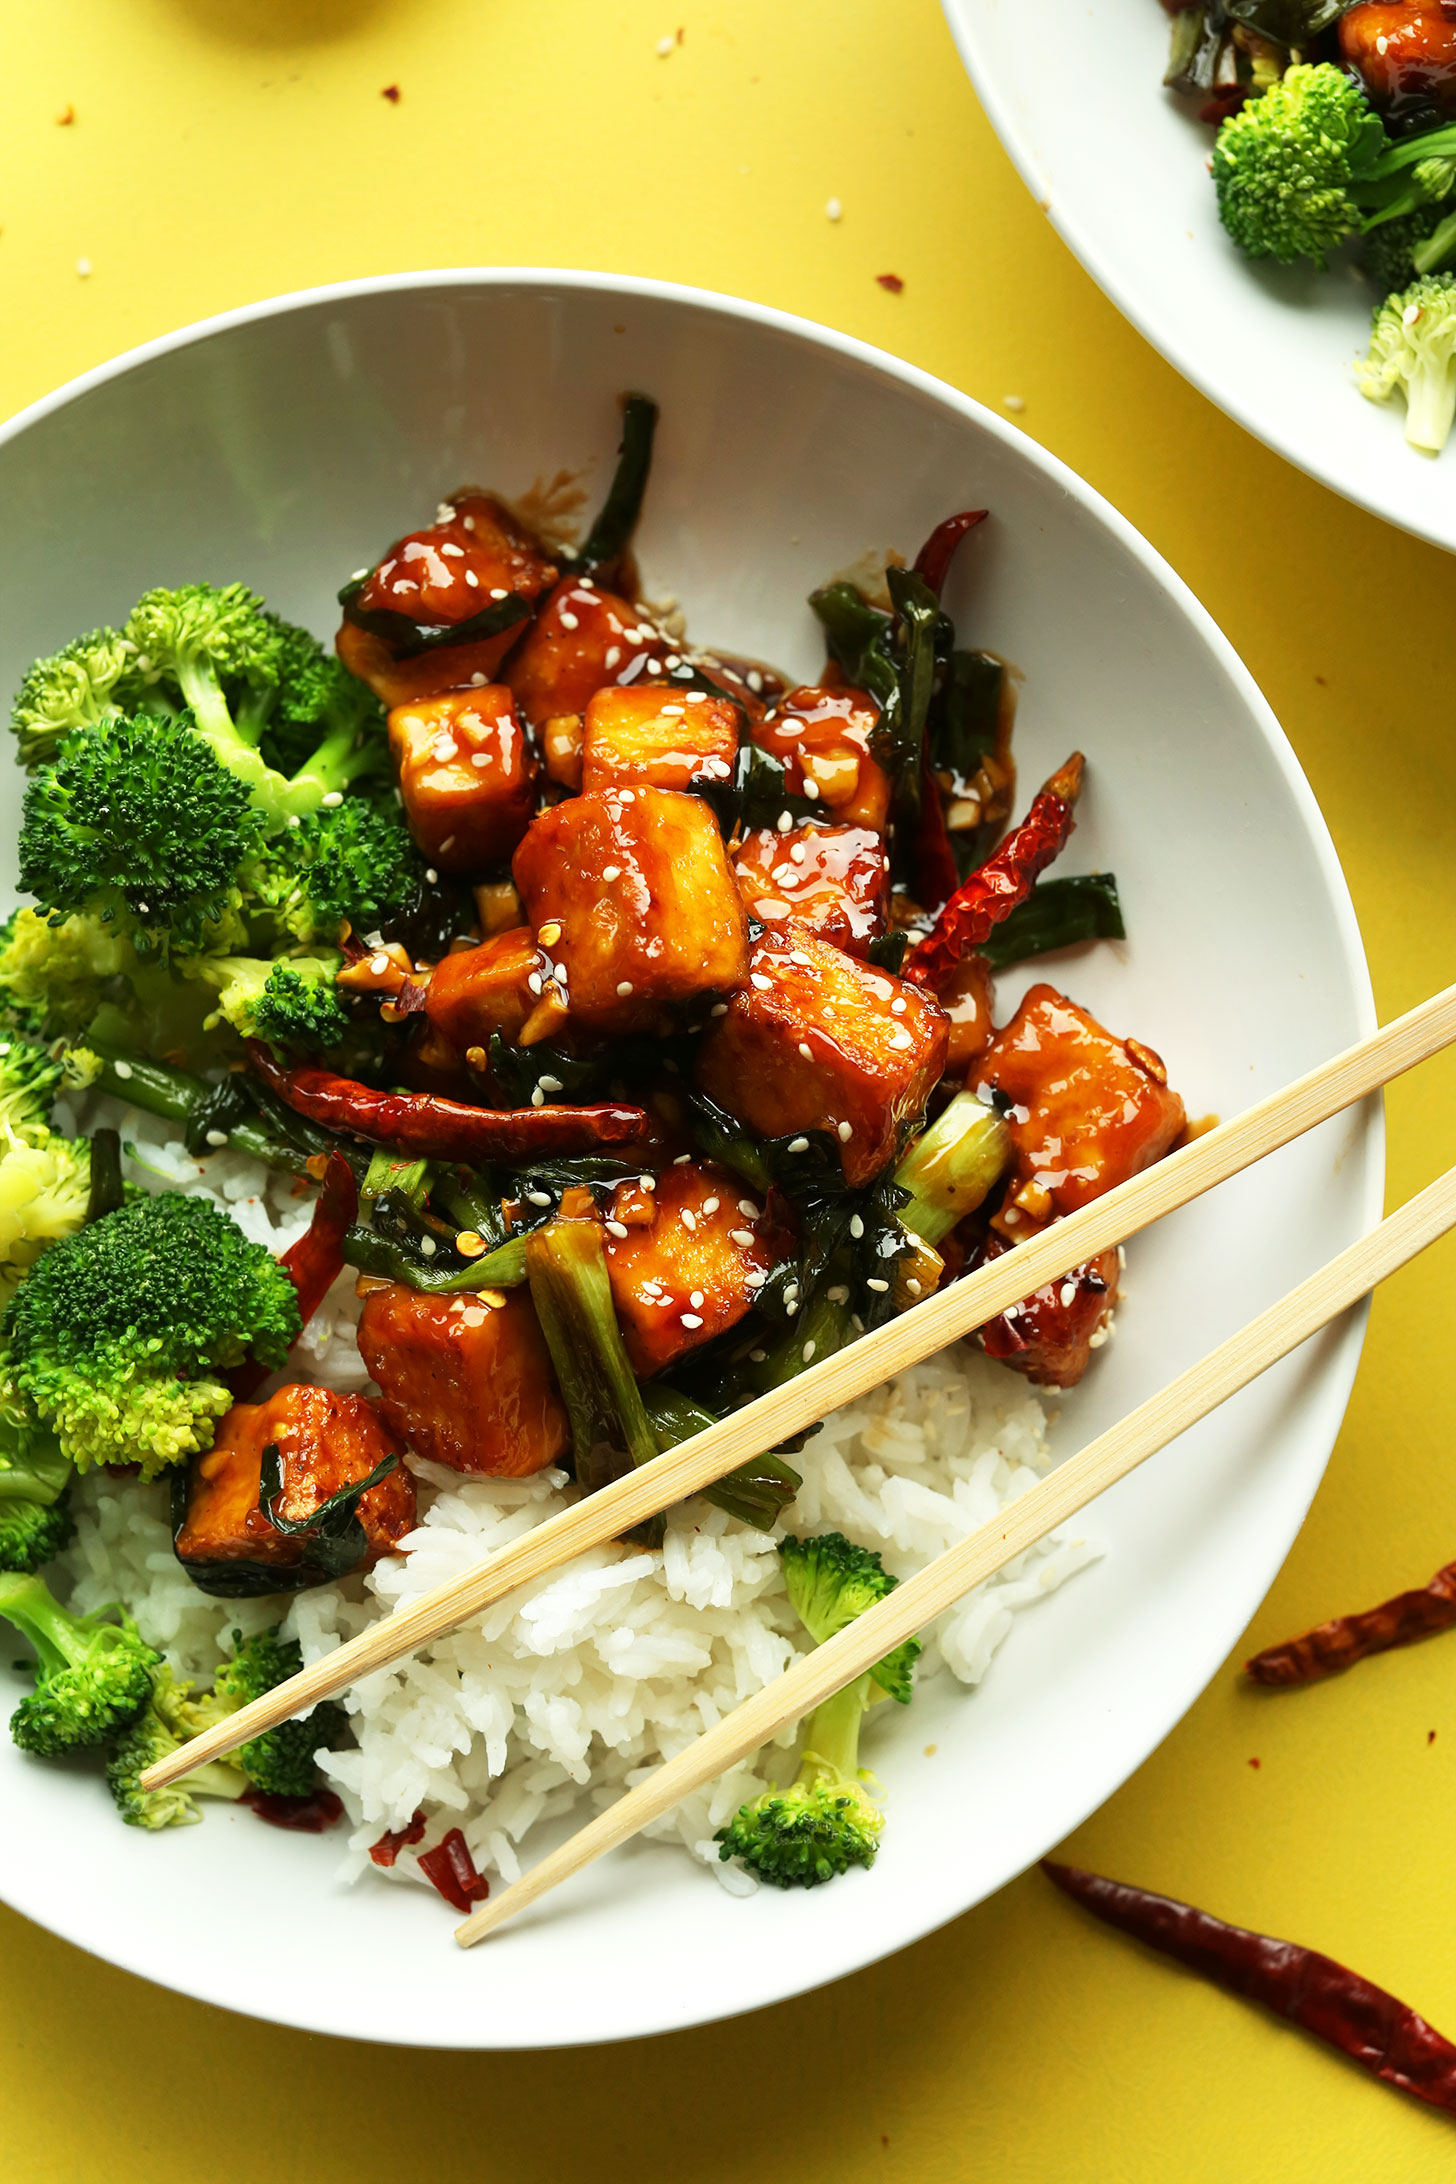 Big bowl of our General Tso's Tofu recipe alongside rice and broccoli for a protein-packed vegan meal